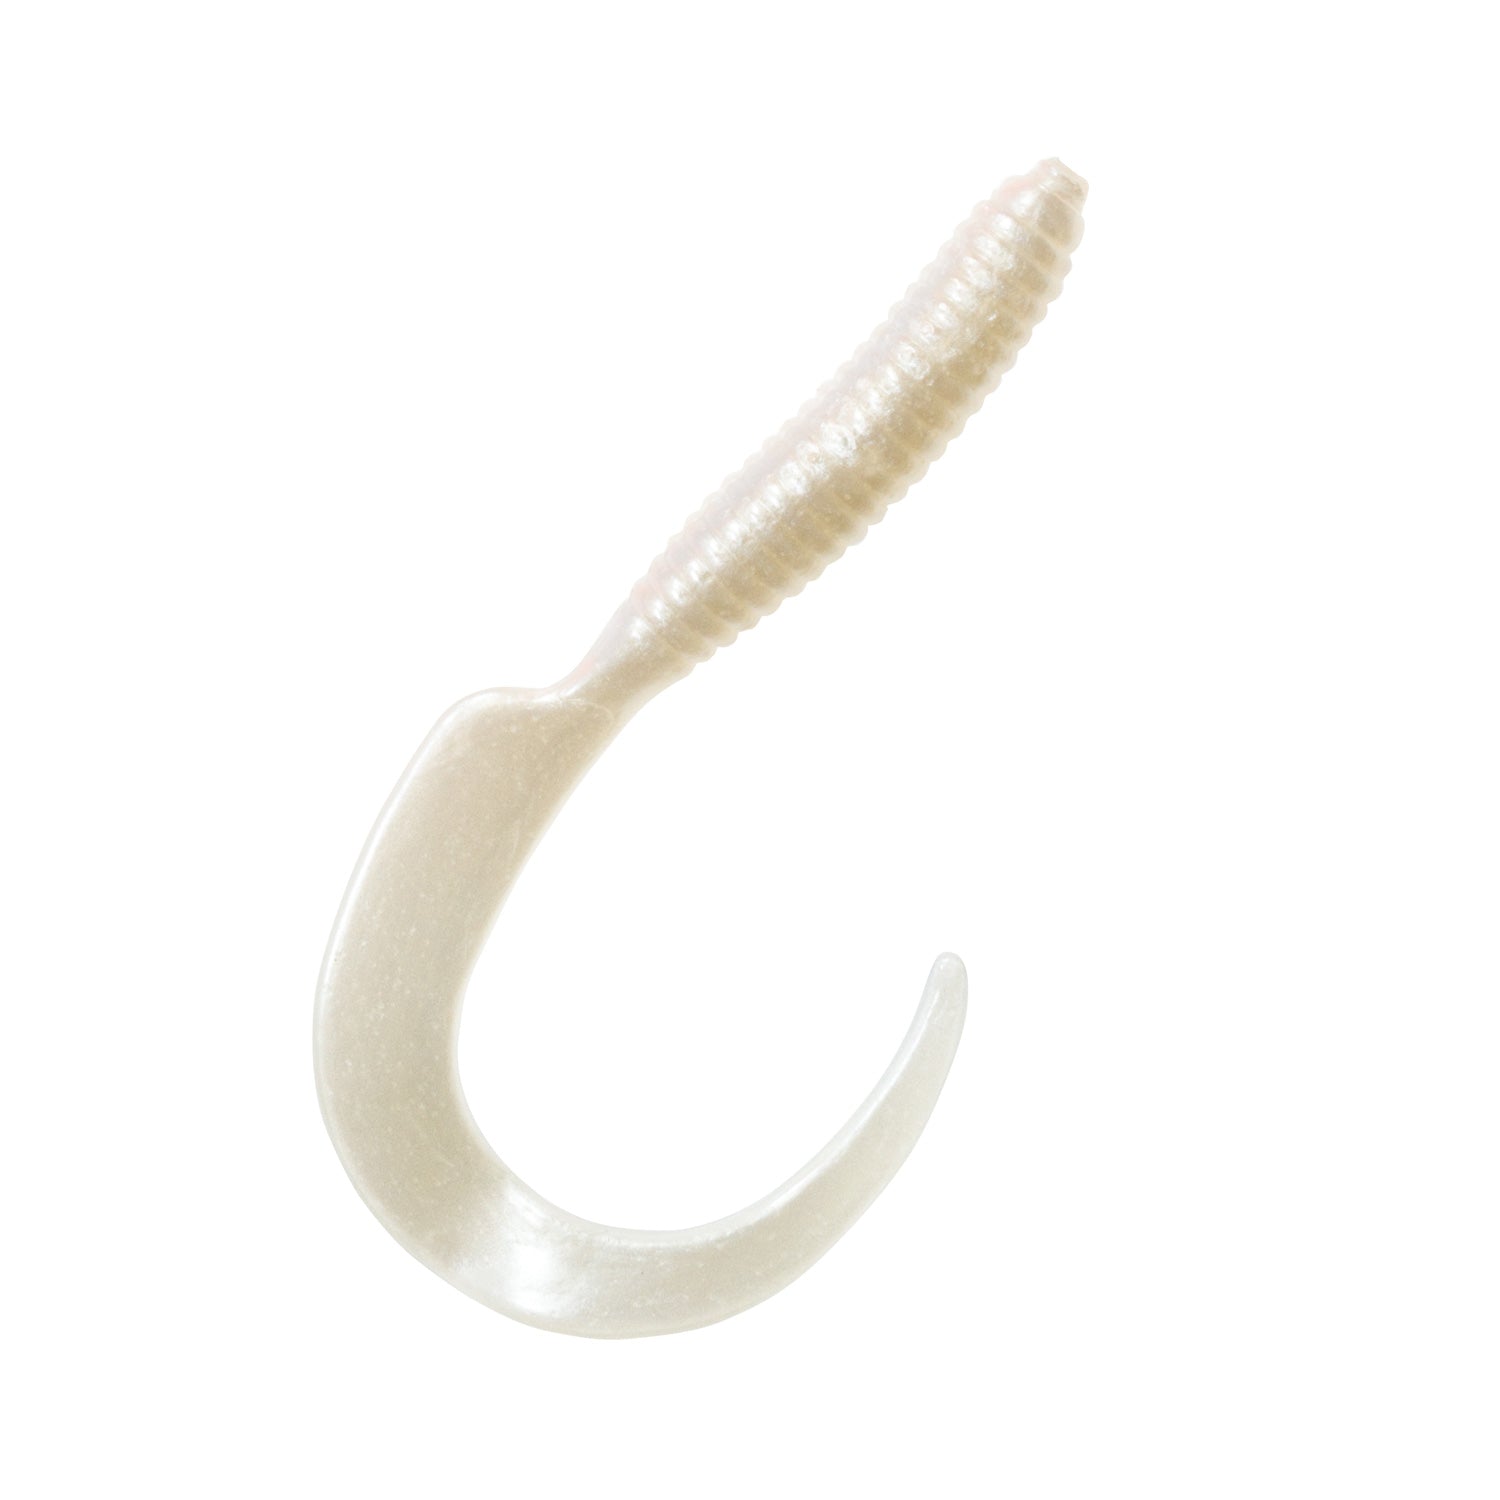 Charlies Worms 6 In Grub Pearl White